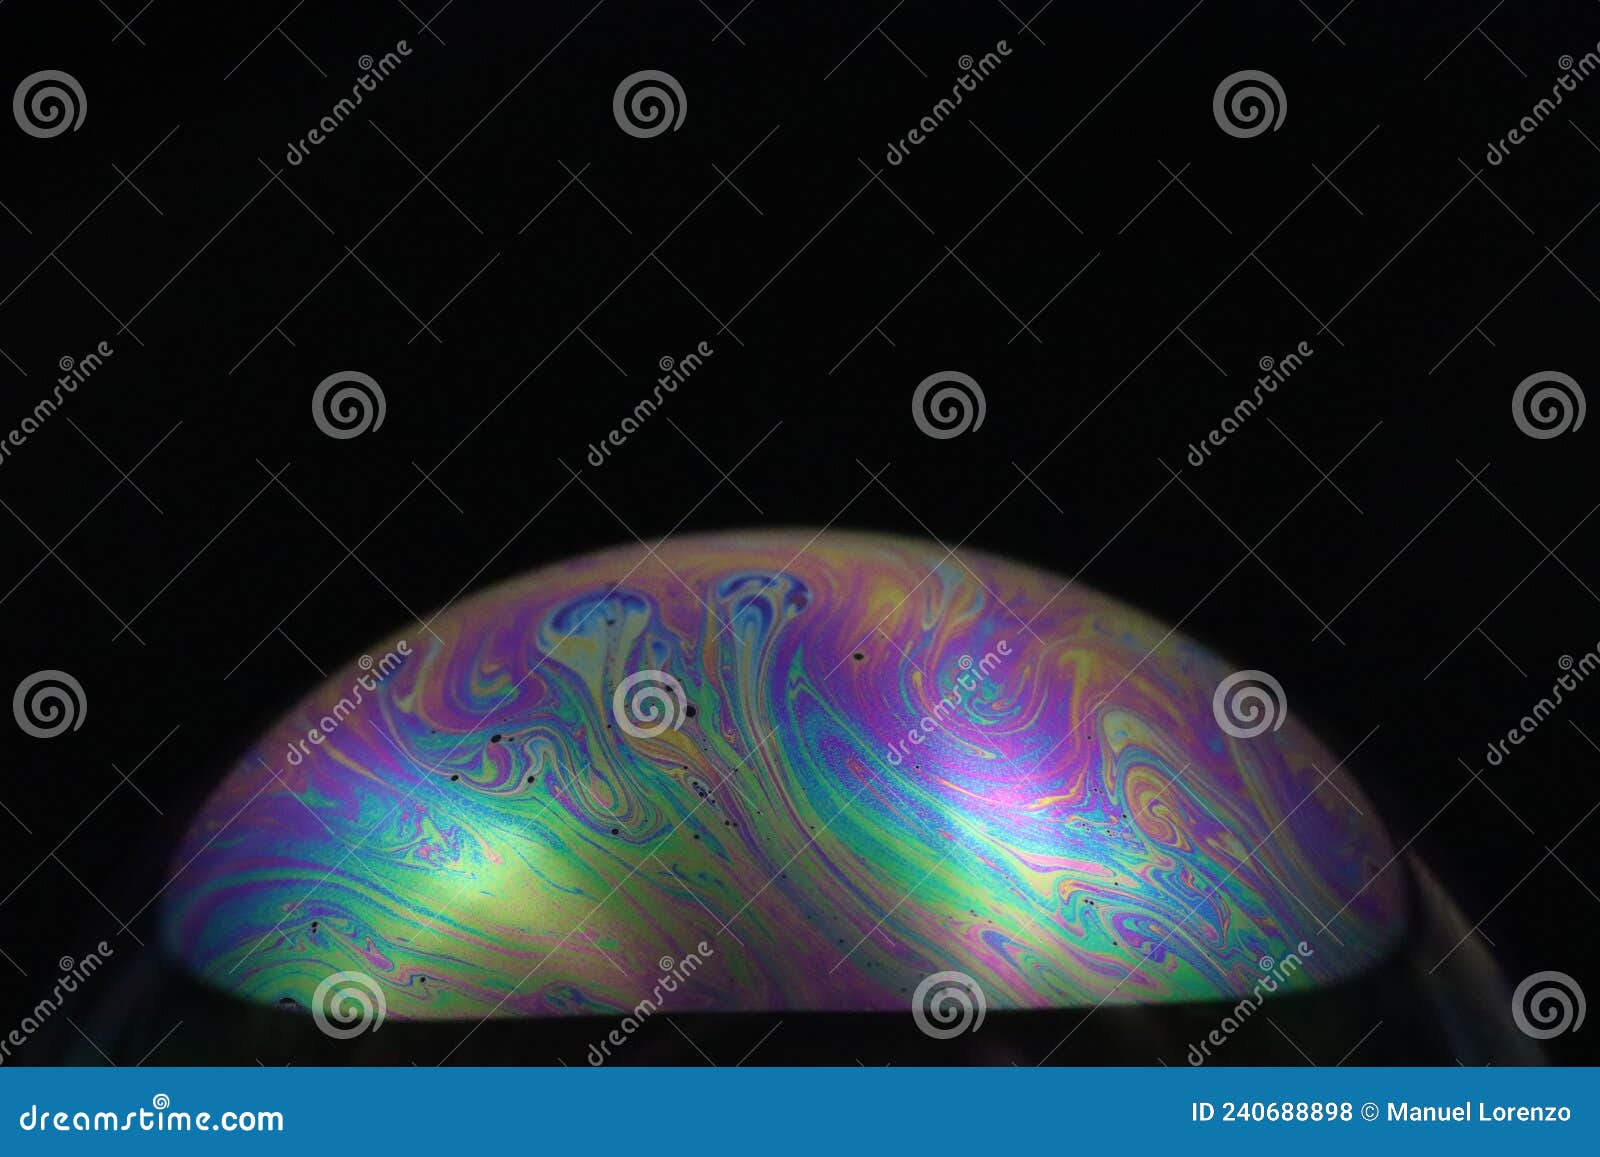 beautiful artificial planet pomp soap different rare spectacular amazing galaxy